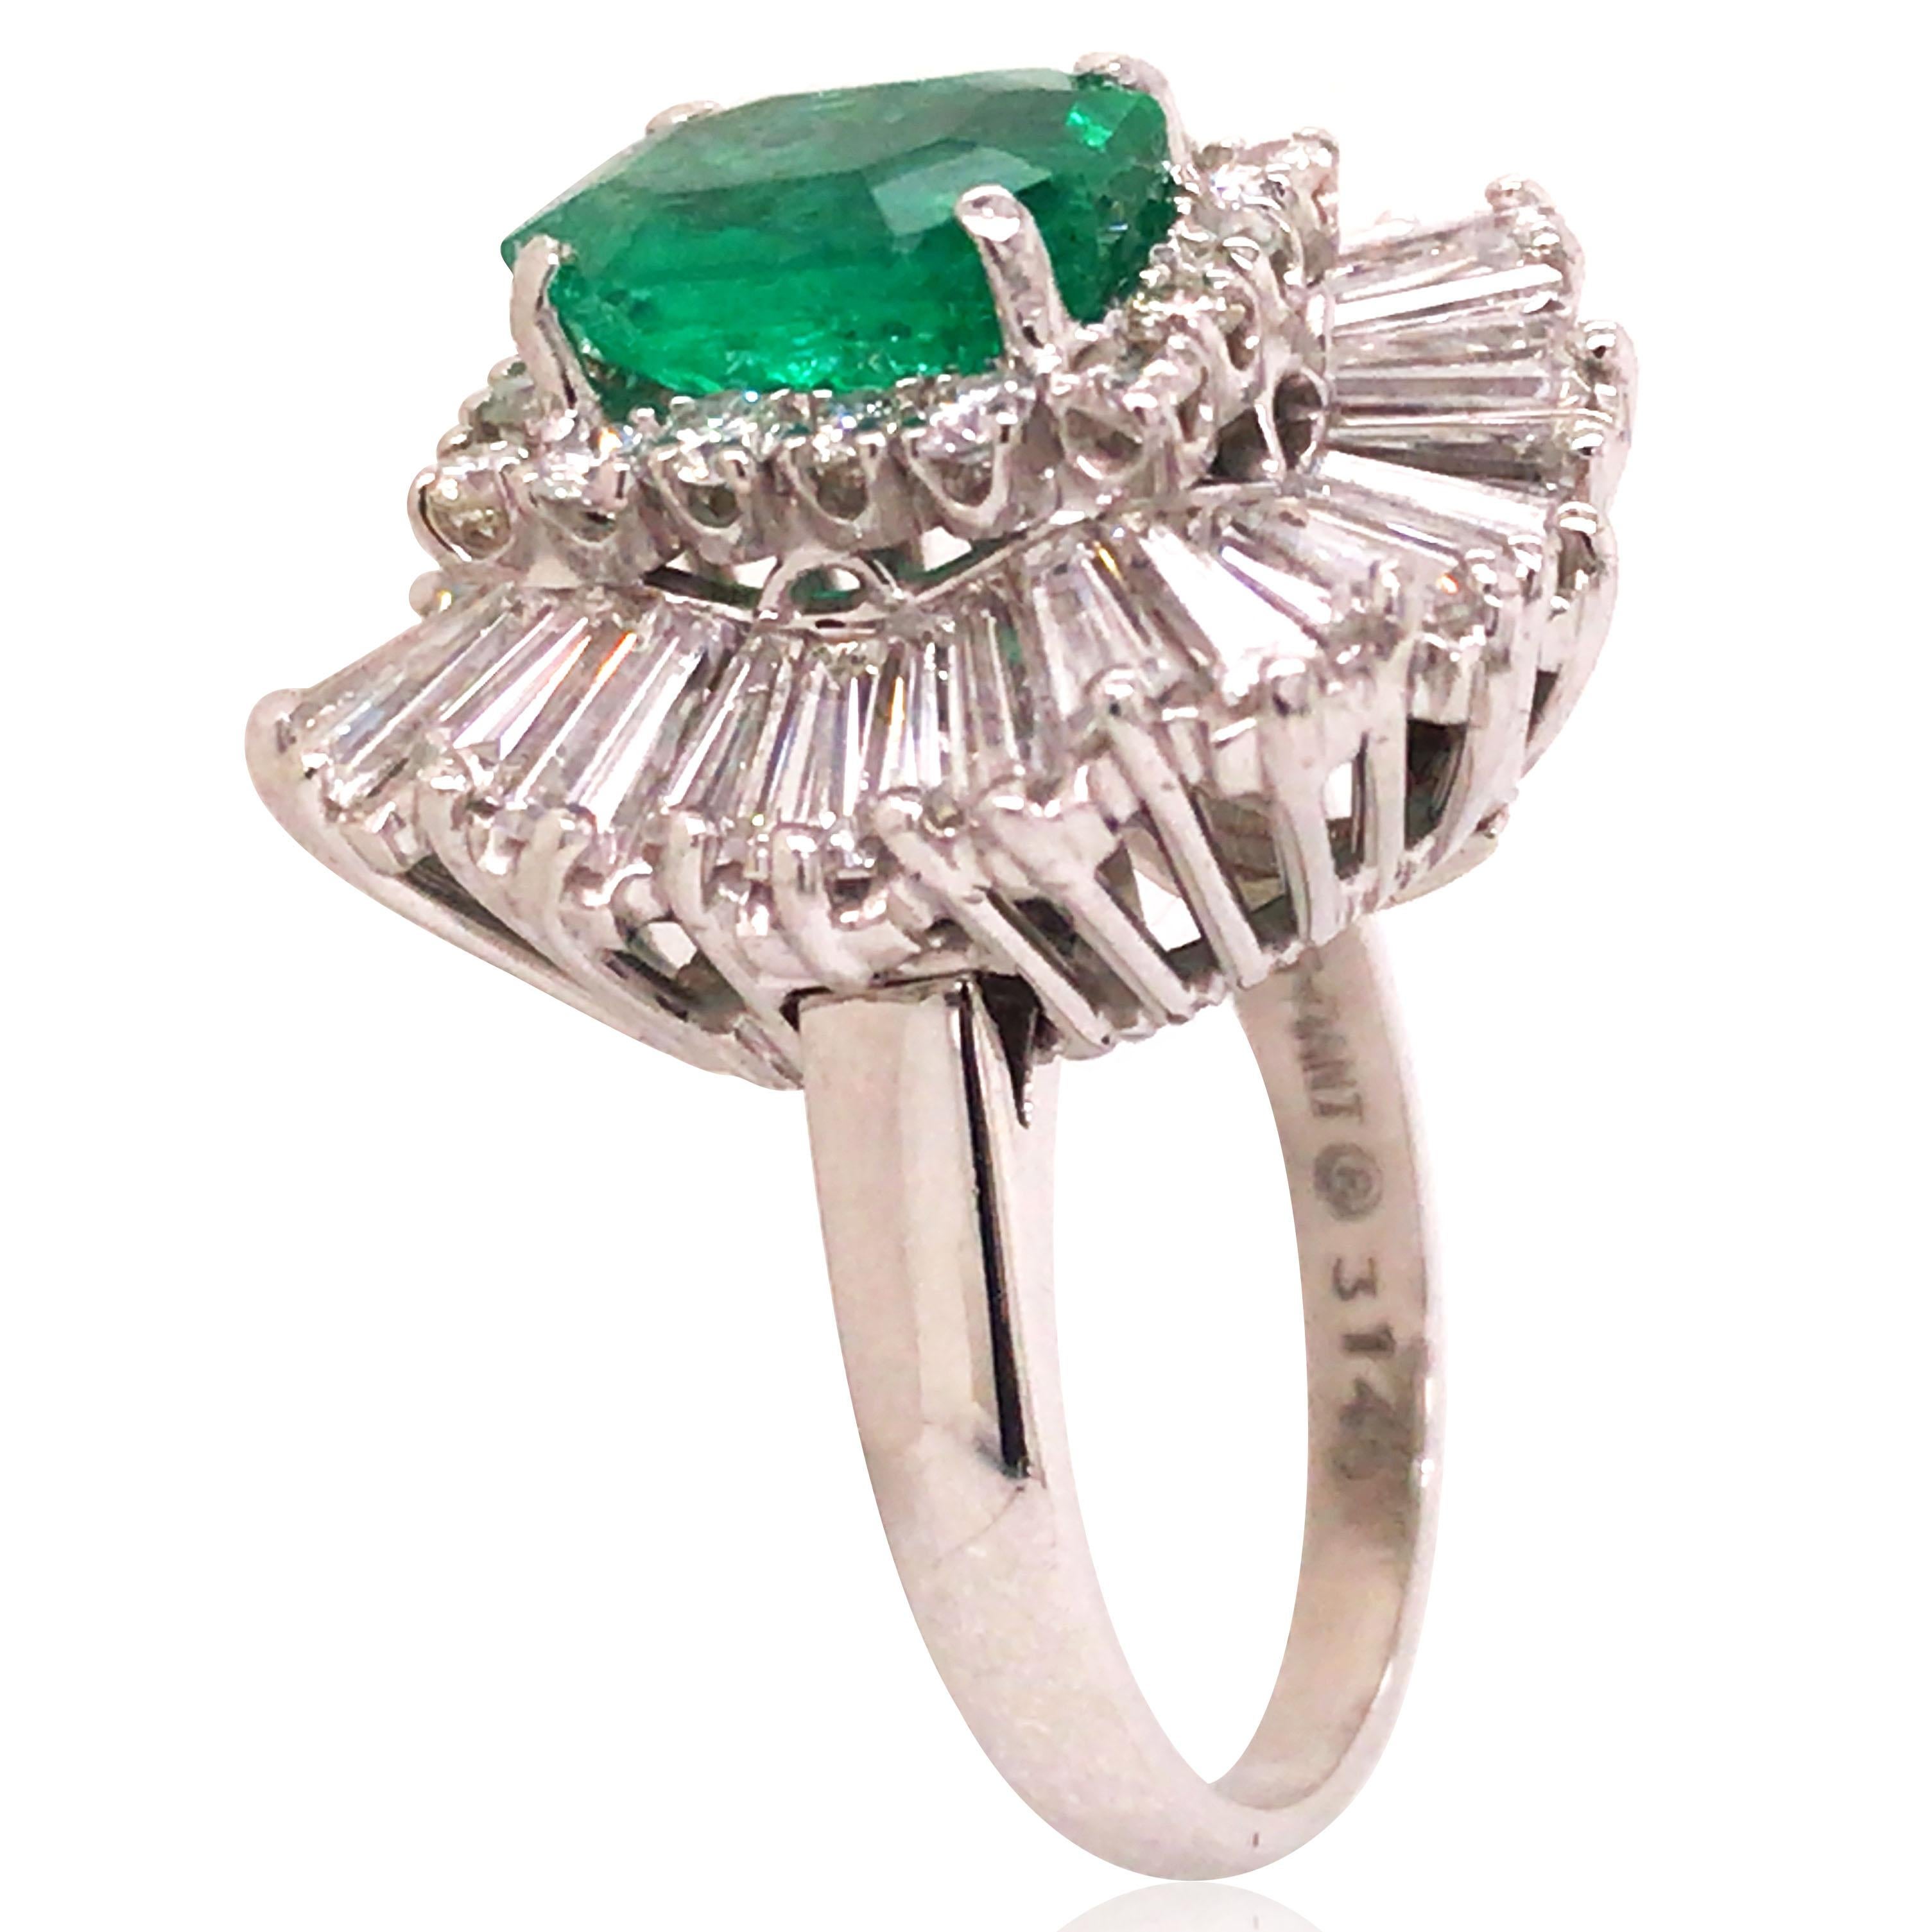 2.08ct octagonal step cut Colombia emerald is surrounded by tapered baguette cut diamonds, total approx. 2.52ct, G-H/VS-SI, round brilliant-cut diamonds total approx. 0.48ct, G-H/VS-SI. Ring size: 5. Accompanied by an AGL report stating that the